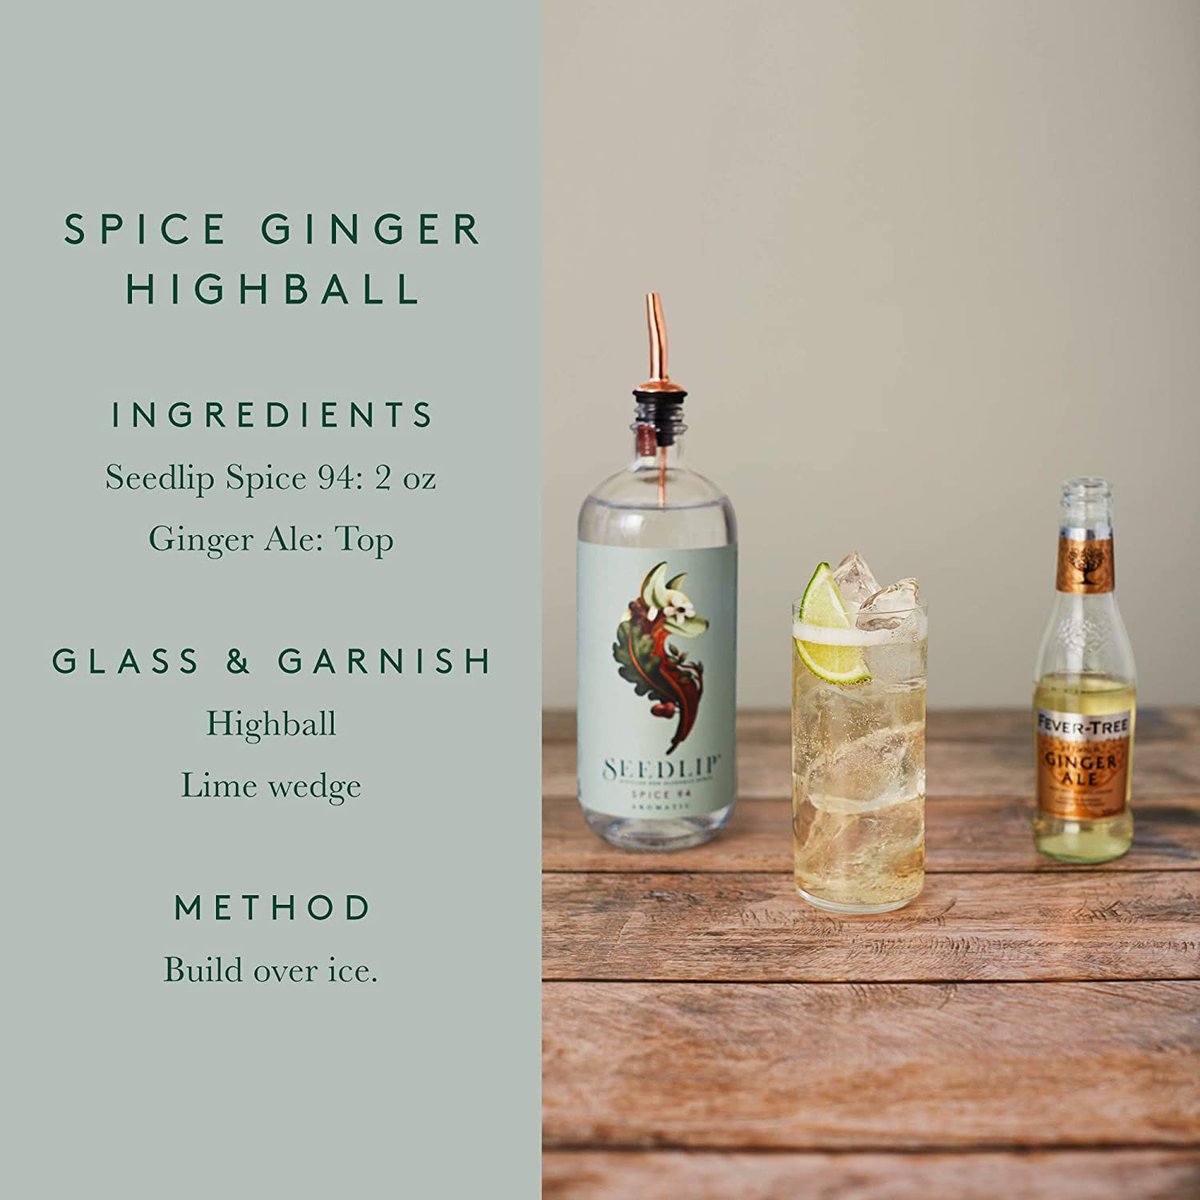 My favorite of the bunch is Spice 94 and my go to was the Spice Ginger Highball. Second would be the Garden 108 and Grove 42 last. Looking at the notes, I would’ve guessed that I would like Spice the most but I expected to like Grove more than Garden 